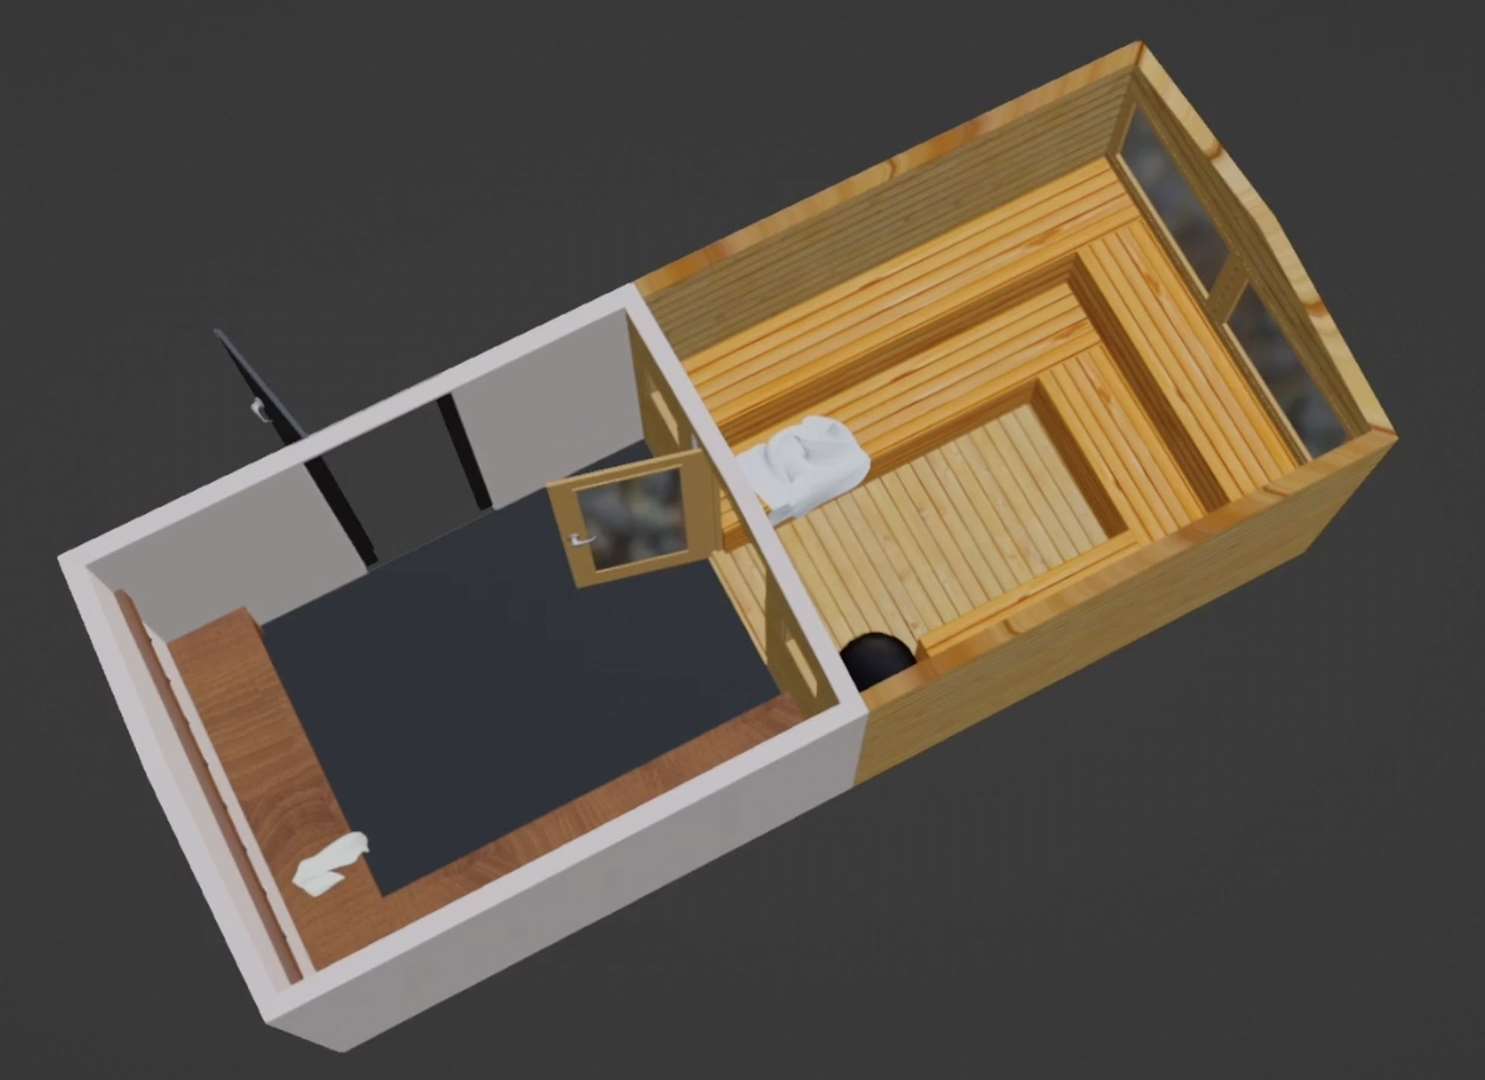 How the sauna would be laid out inside. Picture: Peter Blach